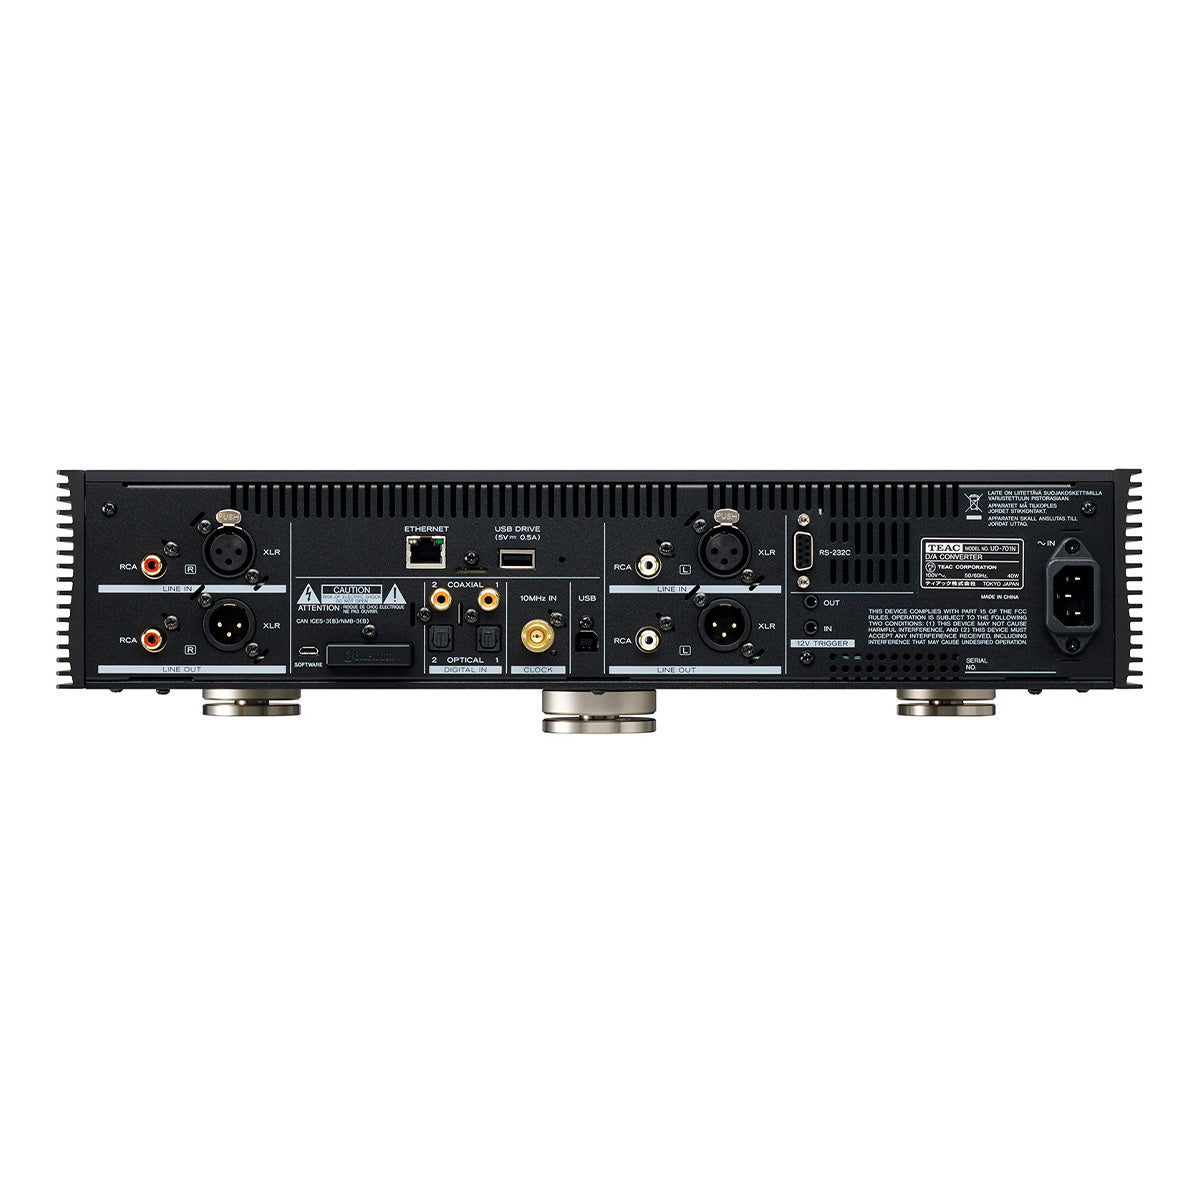 TEAC UD-701N Dual-Mono Fully-Balanced Network Player with Built-In Preamplifier and USB DAC